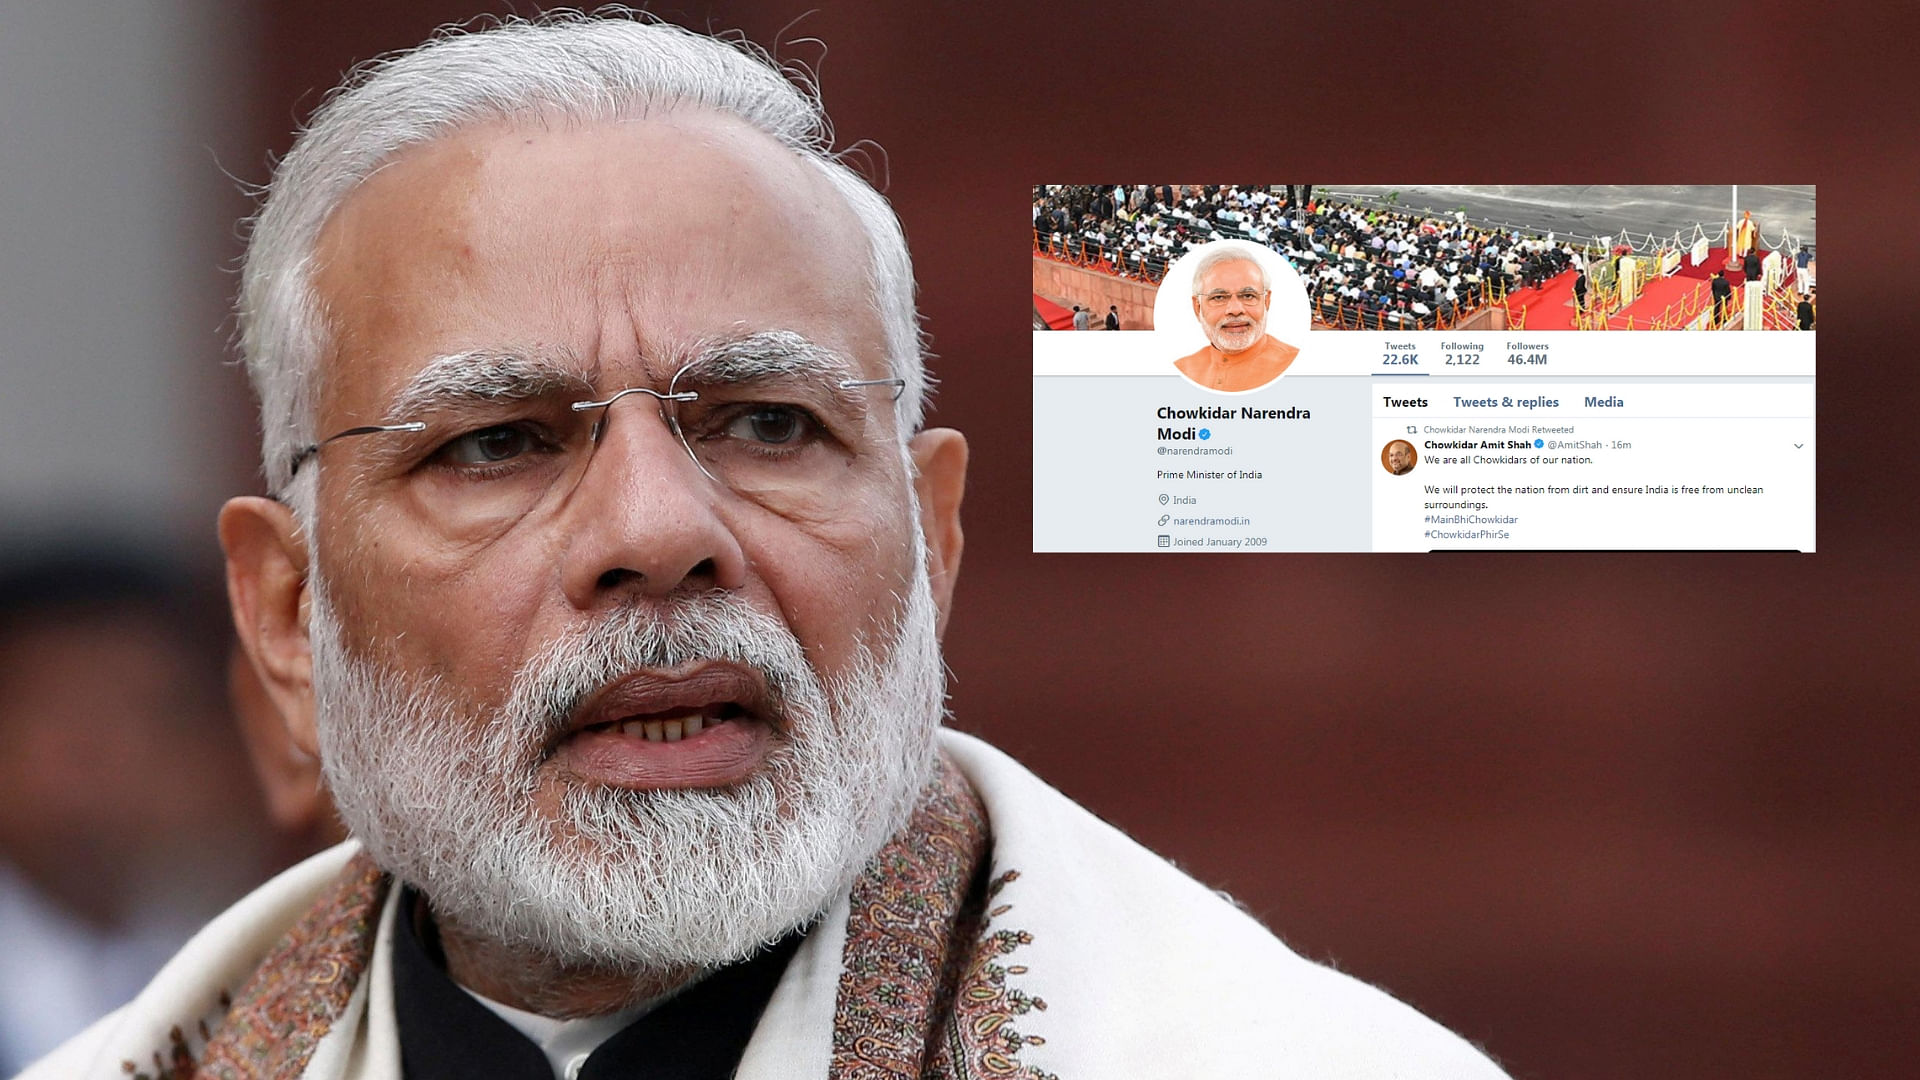 PM Narendra Modi along with other leaders changed his Twitter name to ‘Chowkidar Narendra Modi’.